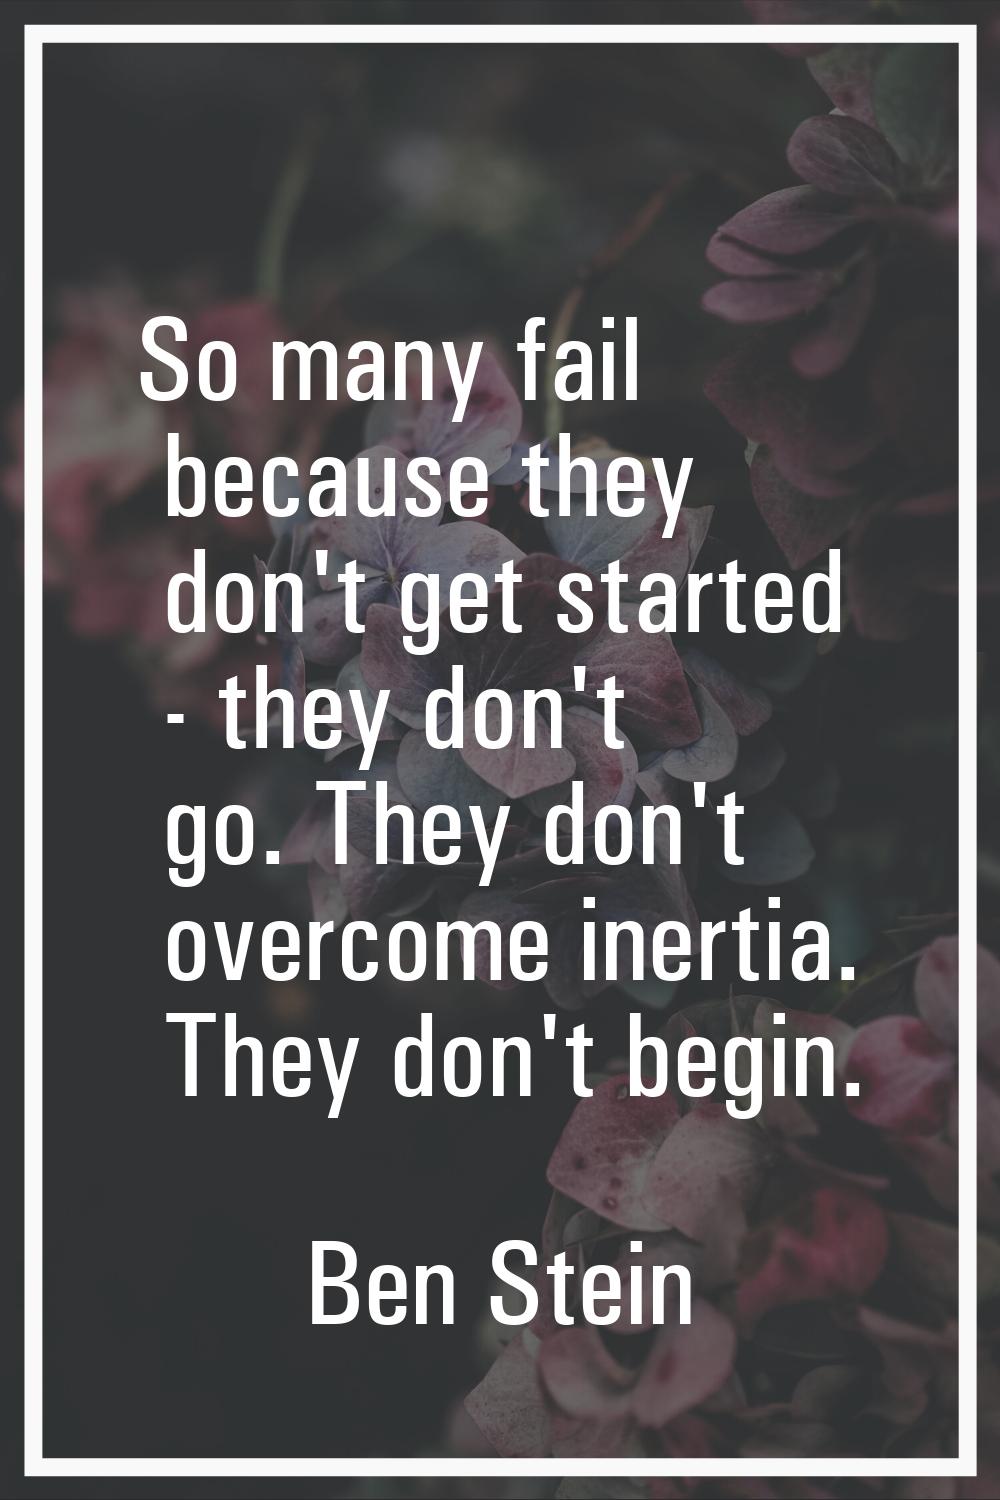 So many fail because they don't get started - they don't go. They don't overcome inertia. They don'